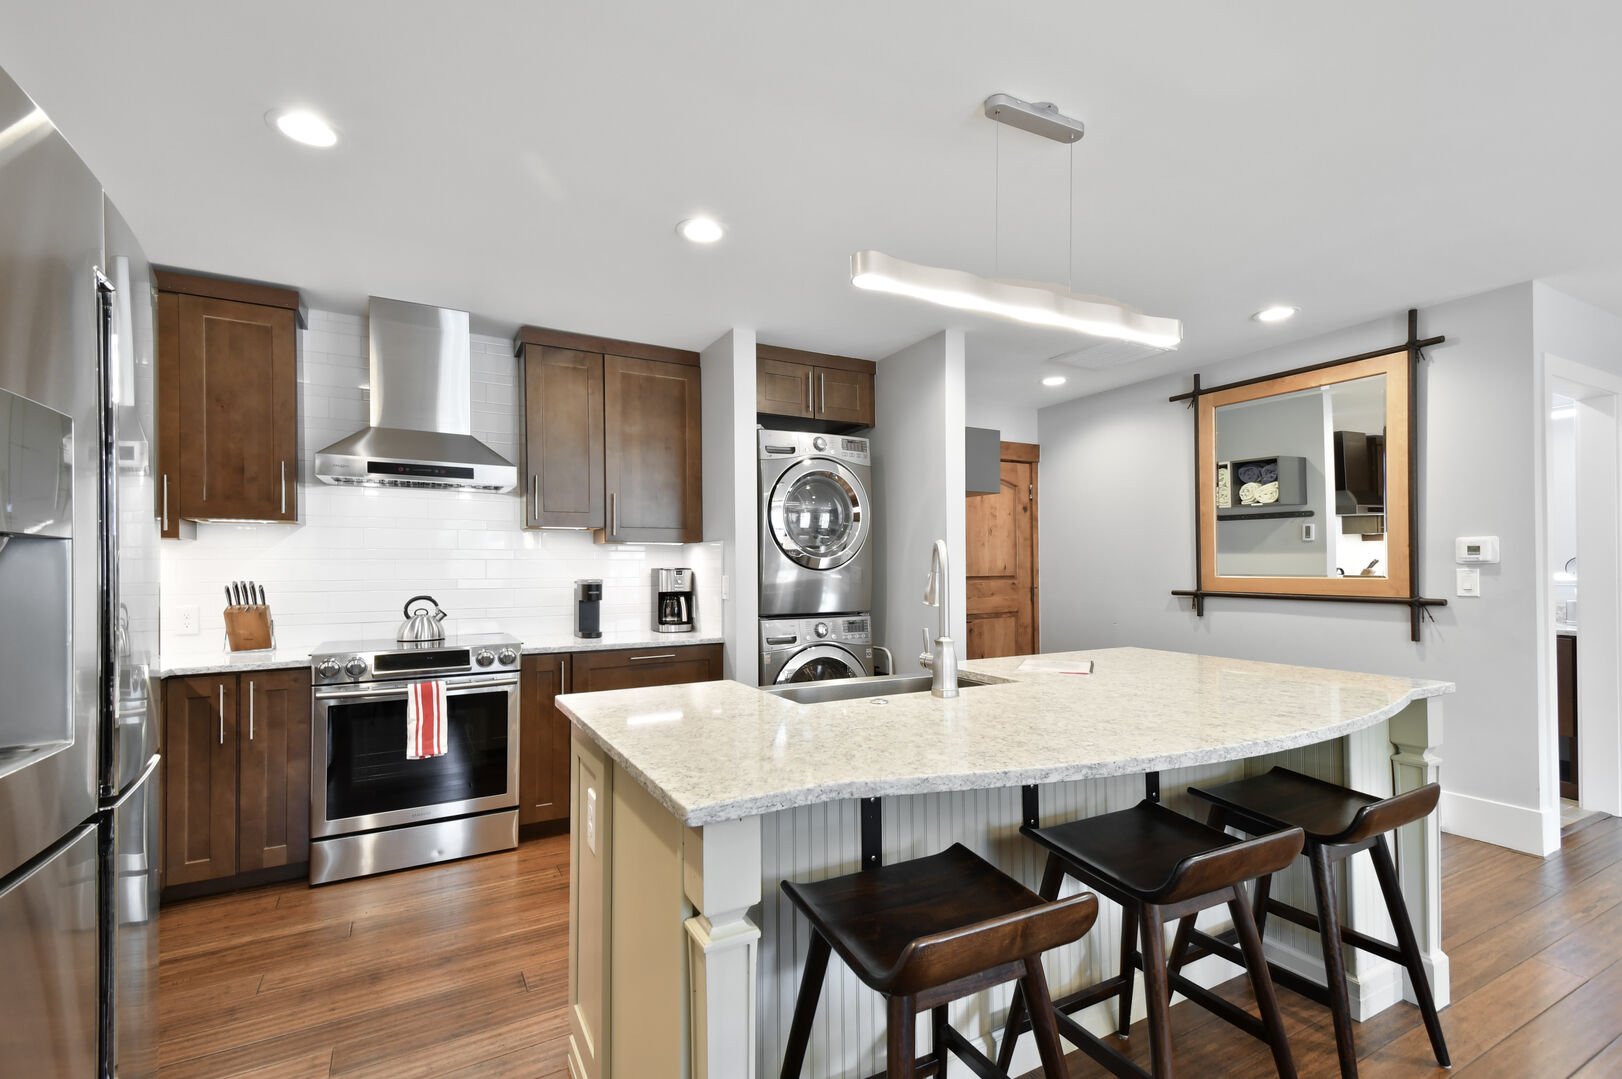 Luxurious kitchen with granite counter tops and stainless steel appliances.